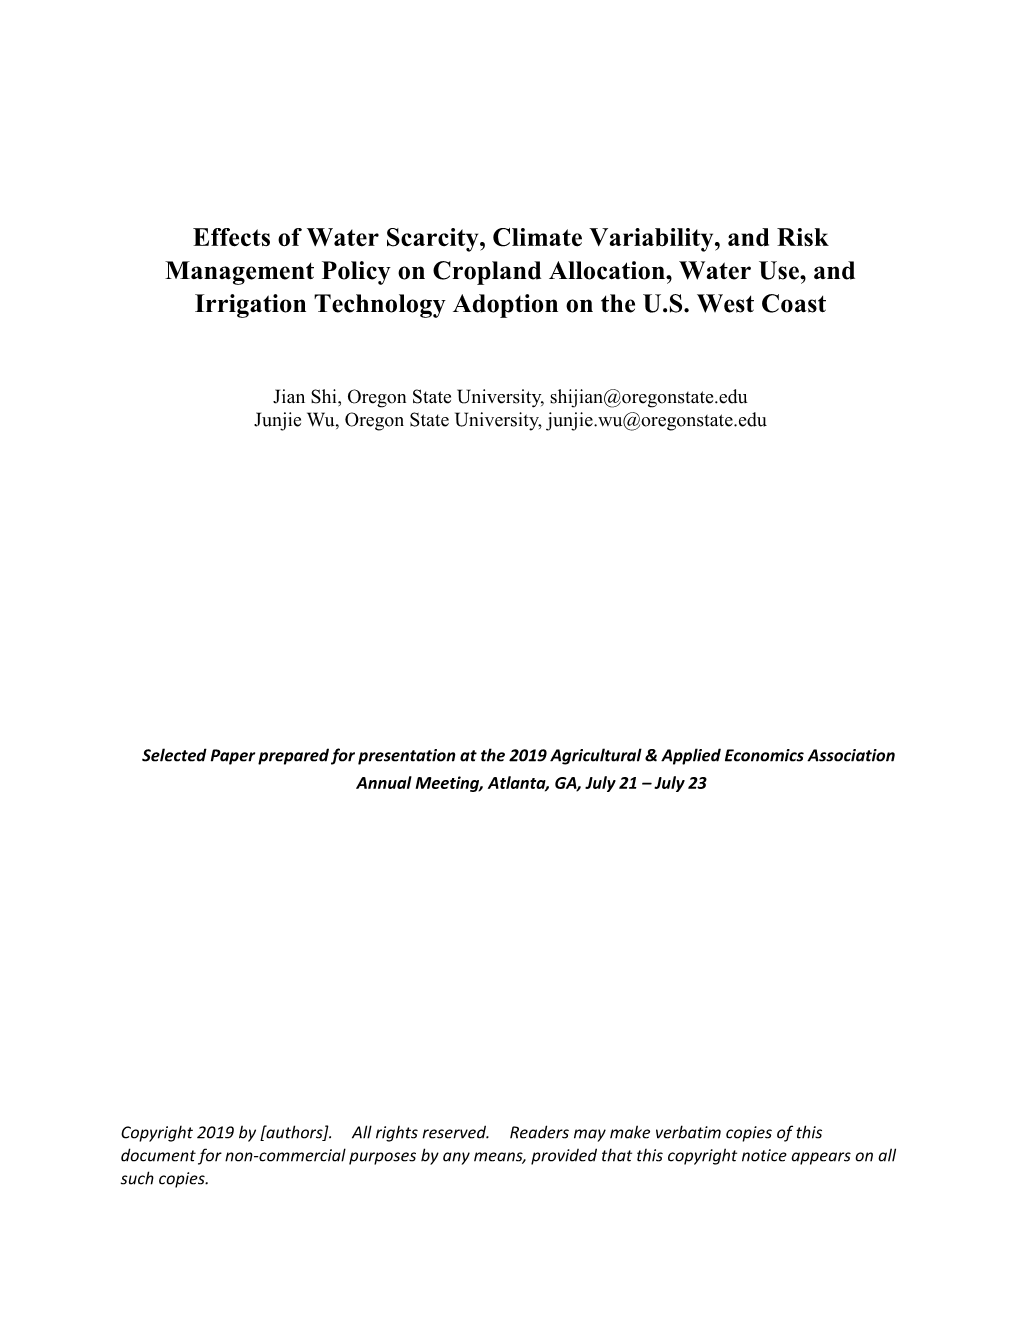 Effects of Water Scarcity, Climate Variability, and Risk Management Policy on Cropland Allocation, Water Use, and Irrigation Technology Adoption on the U.S